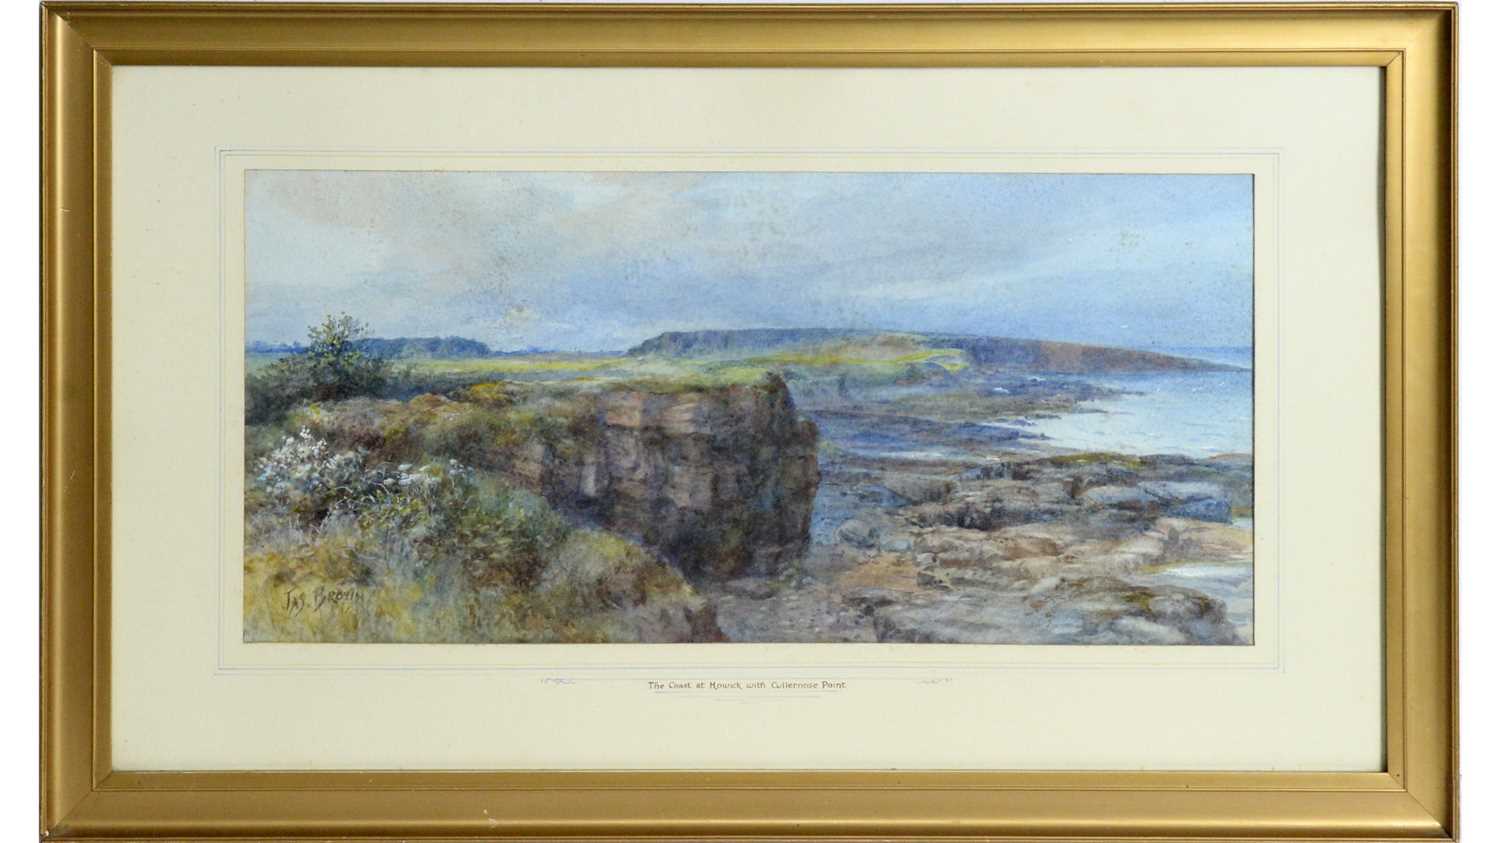 Lot 837 - James Brown - The Coast at Howick with Cullernose Point | watercolour